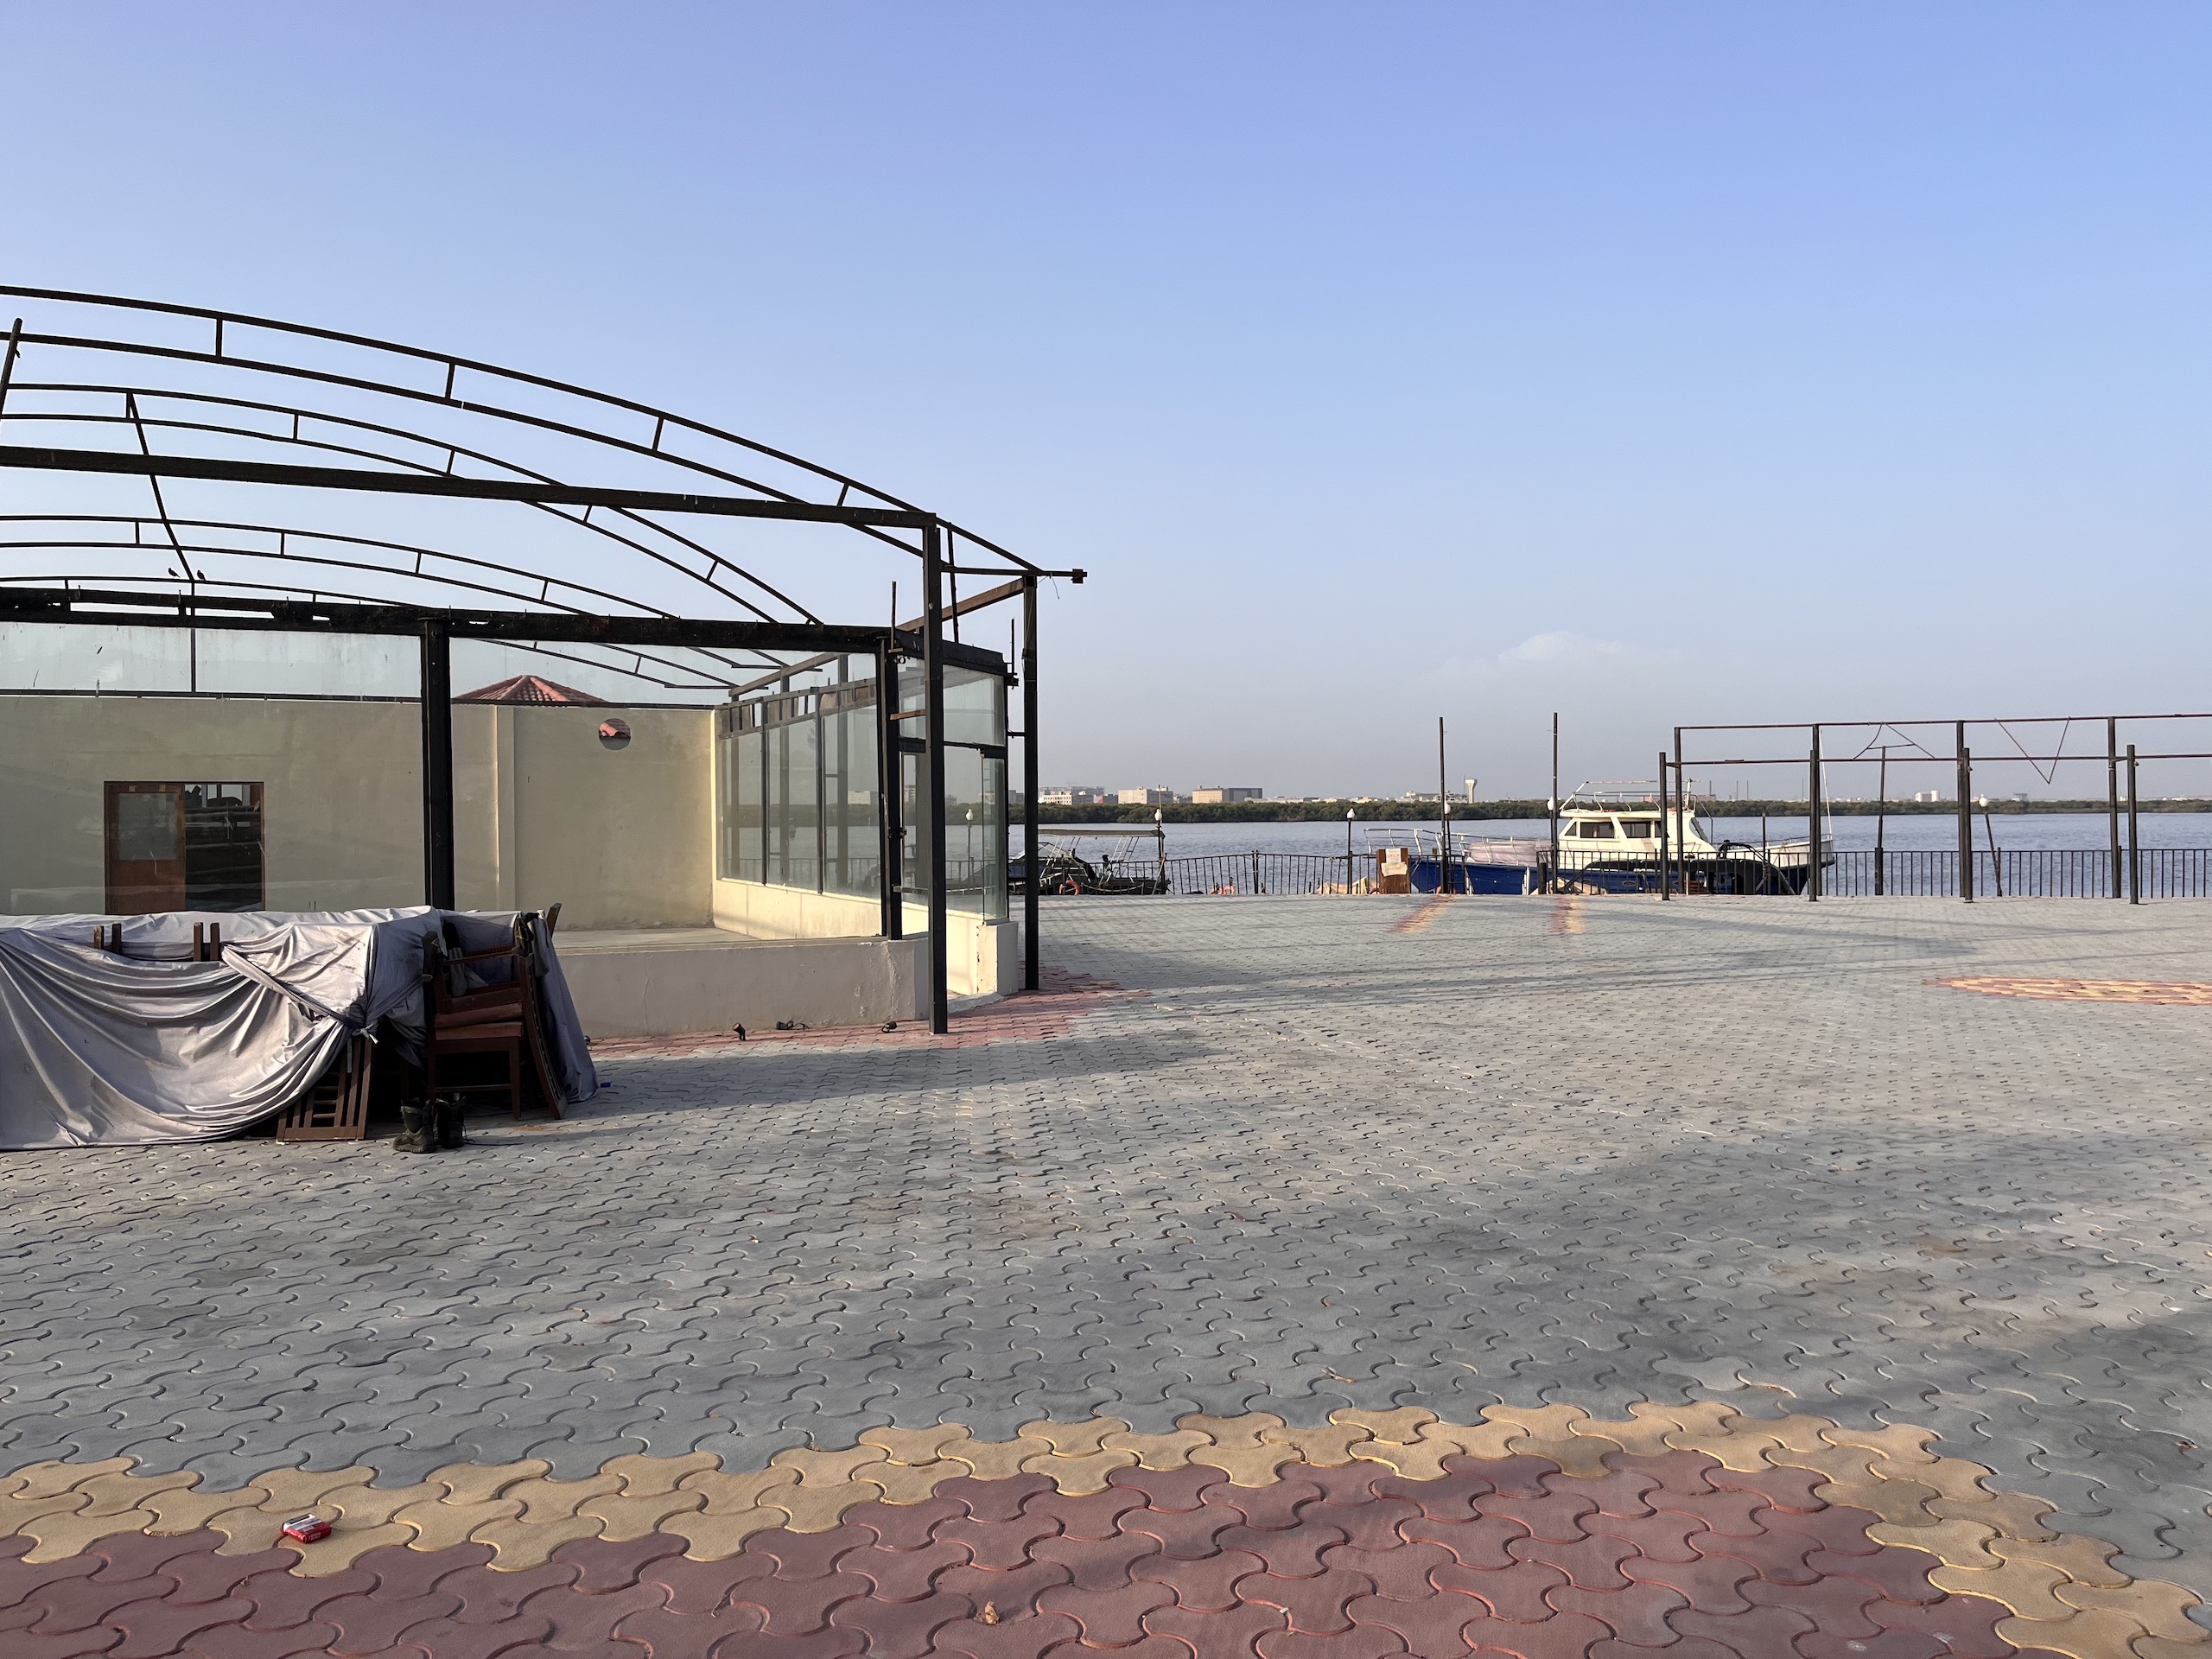 A wedding hall being built in Gizri Creek on reclaimed land 